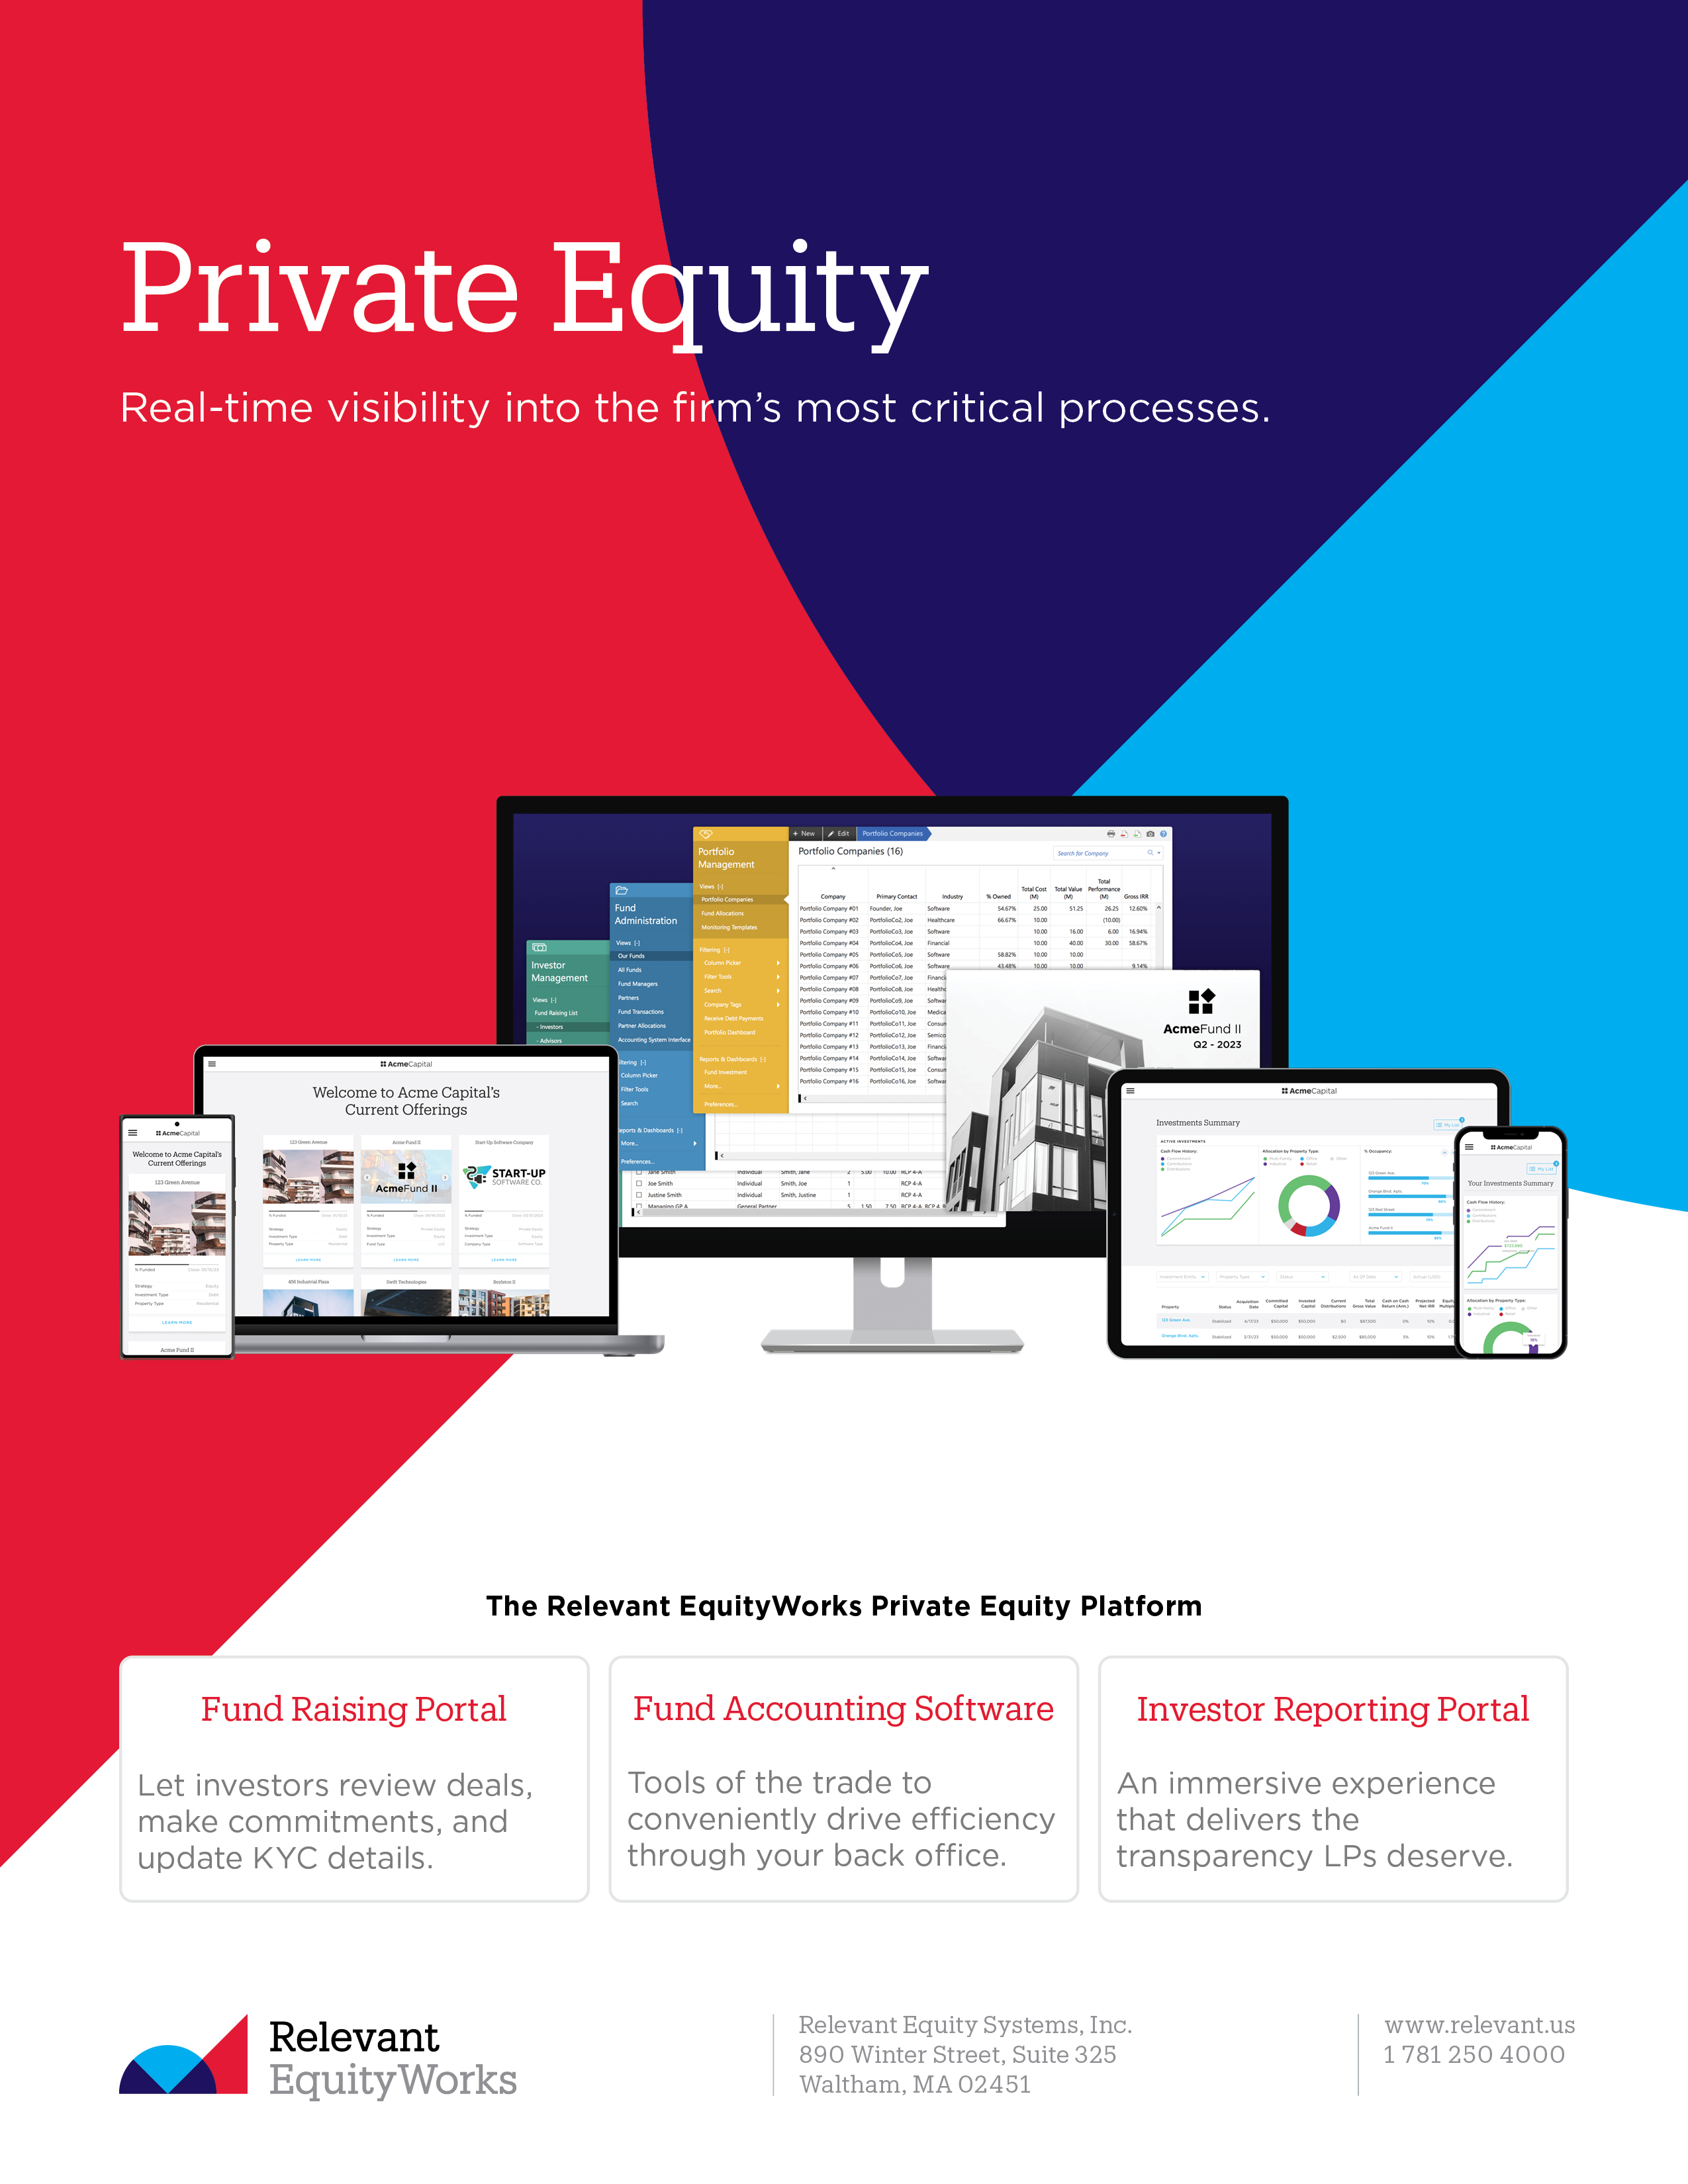 Relevant EquityWorks - Private Equity handout